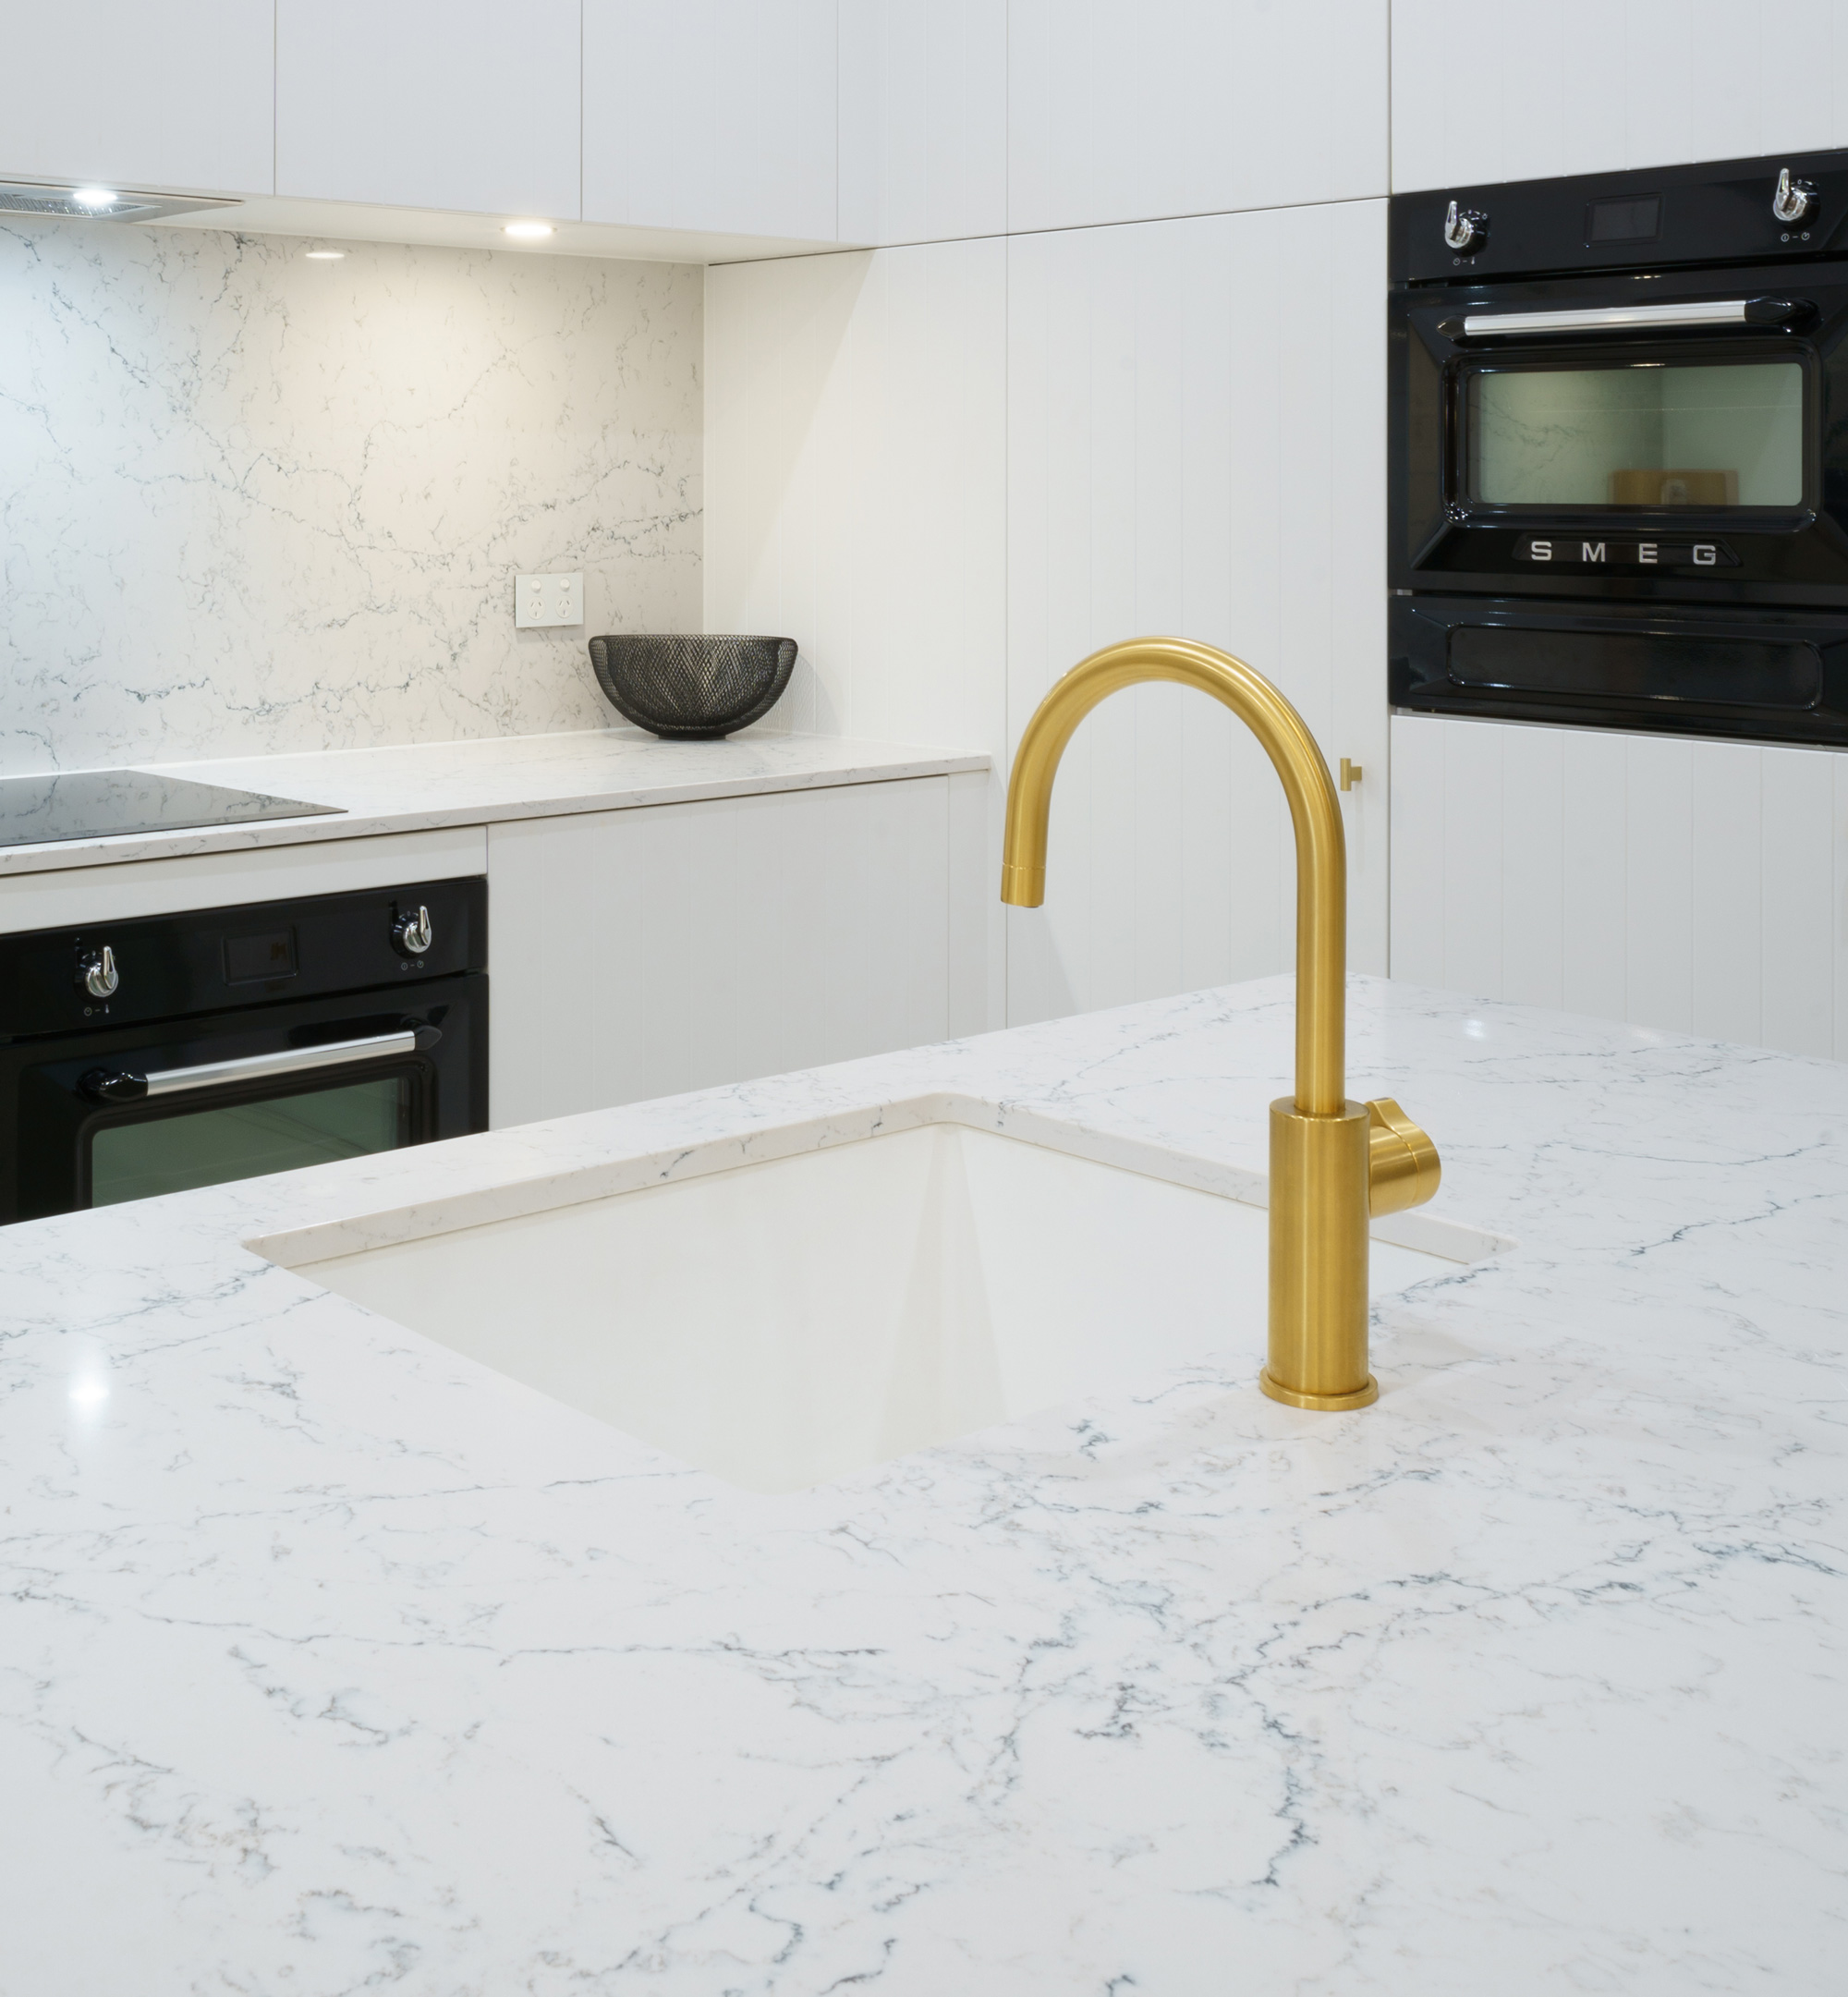 Vilo pull out mixer in bright gold with a white large bowl undermount sink